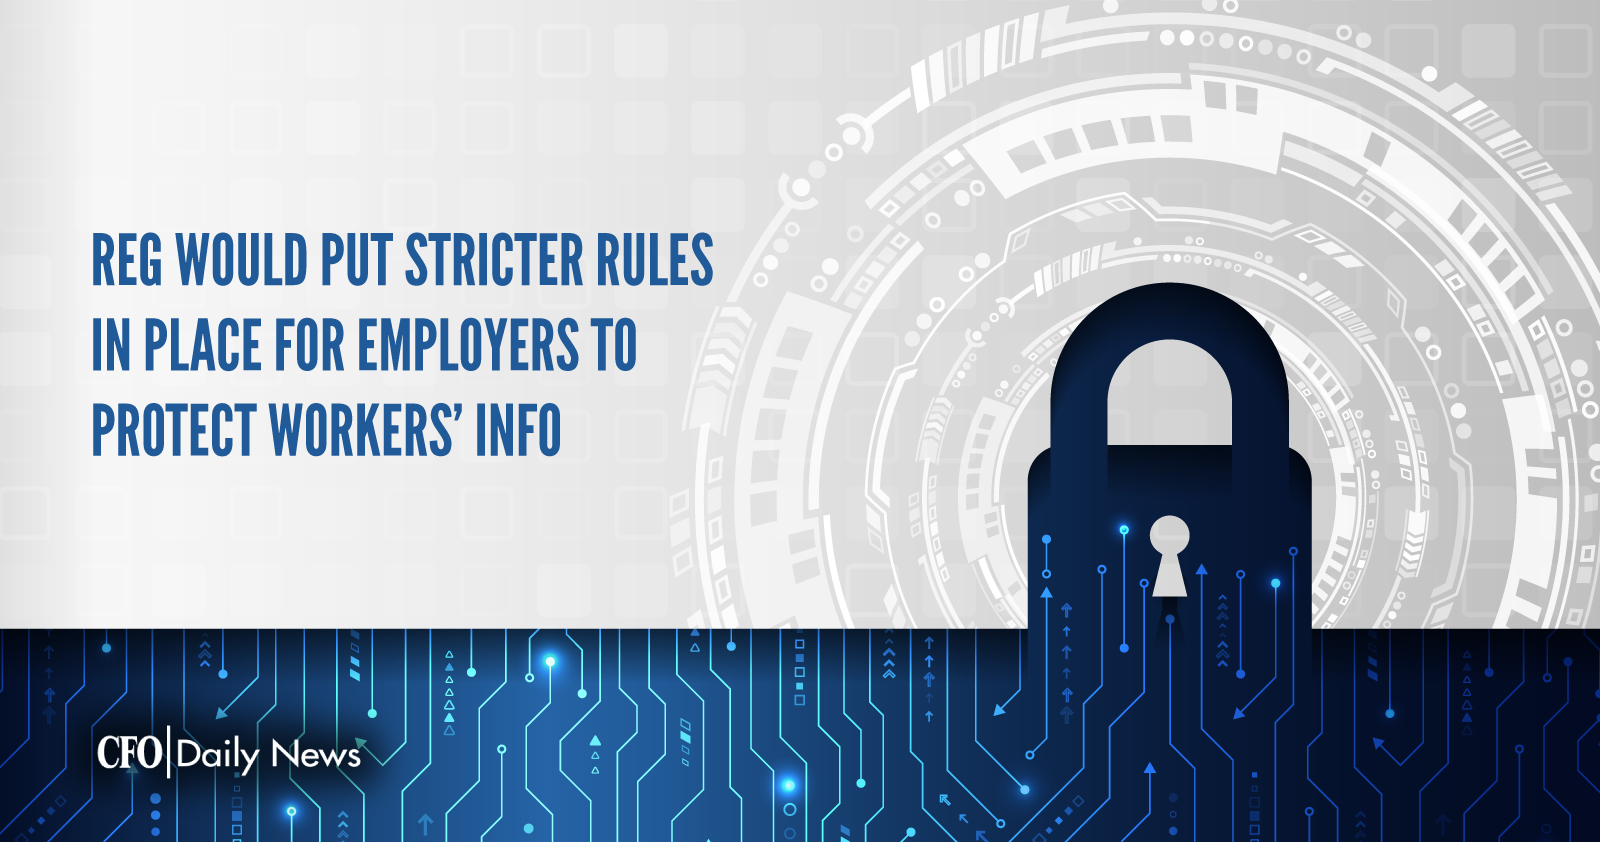 reg would put stricter rules in place for employers to protect workers info